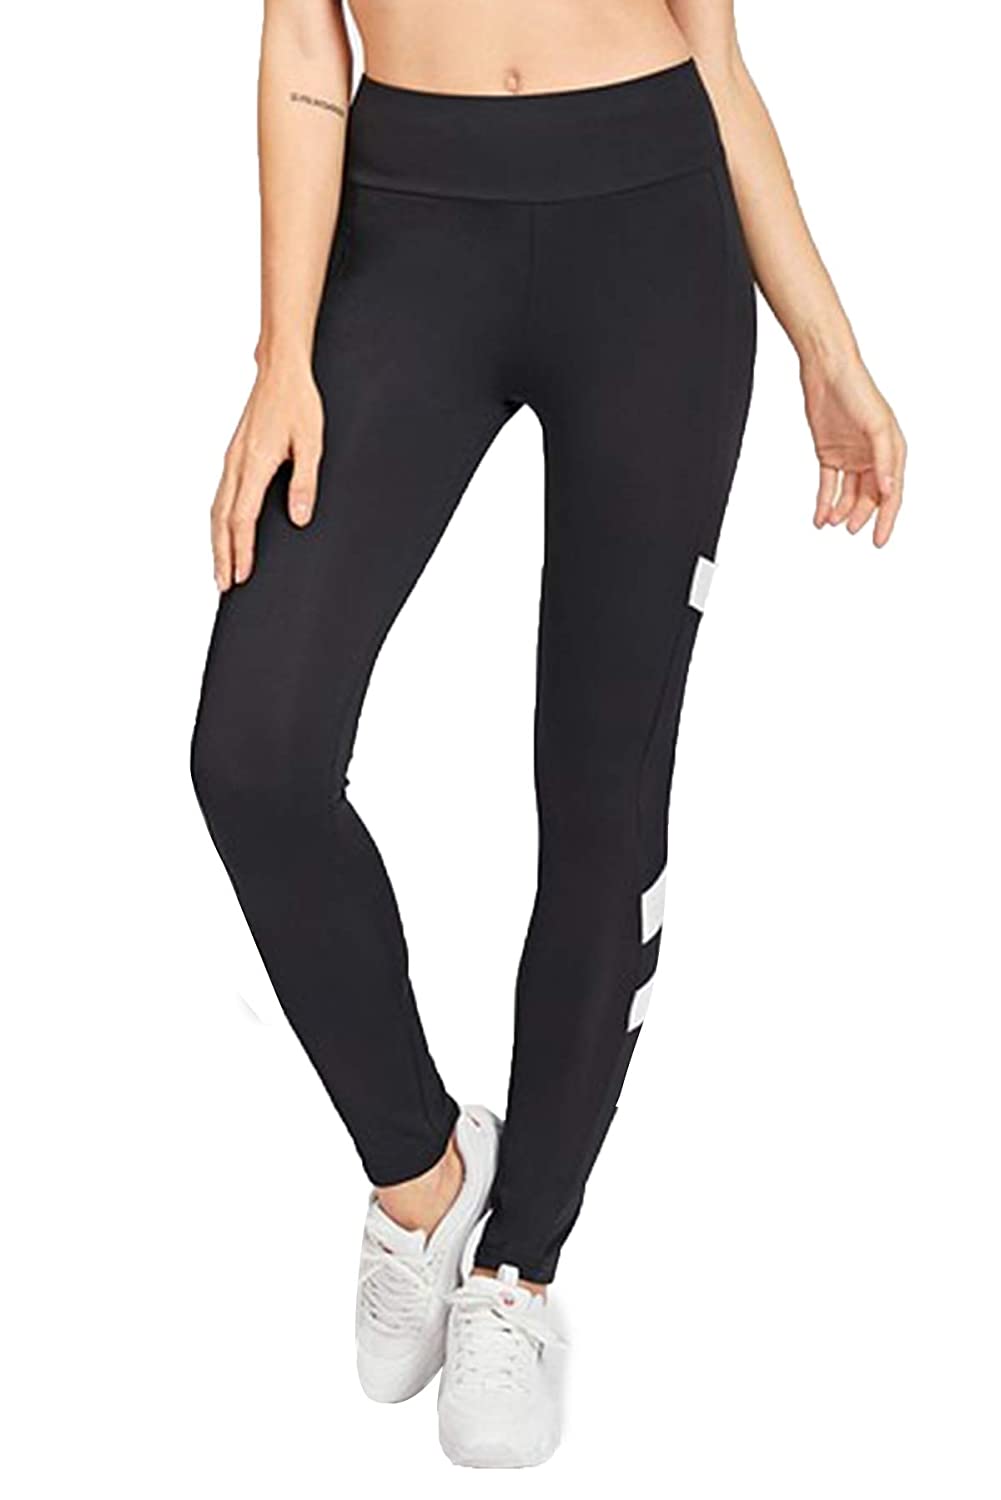 The Perfect Gym Pants for Women – Diver 3d